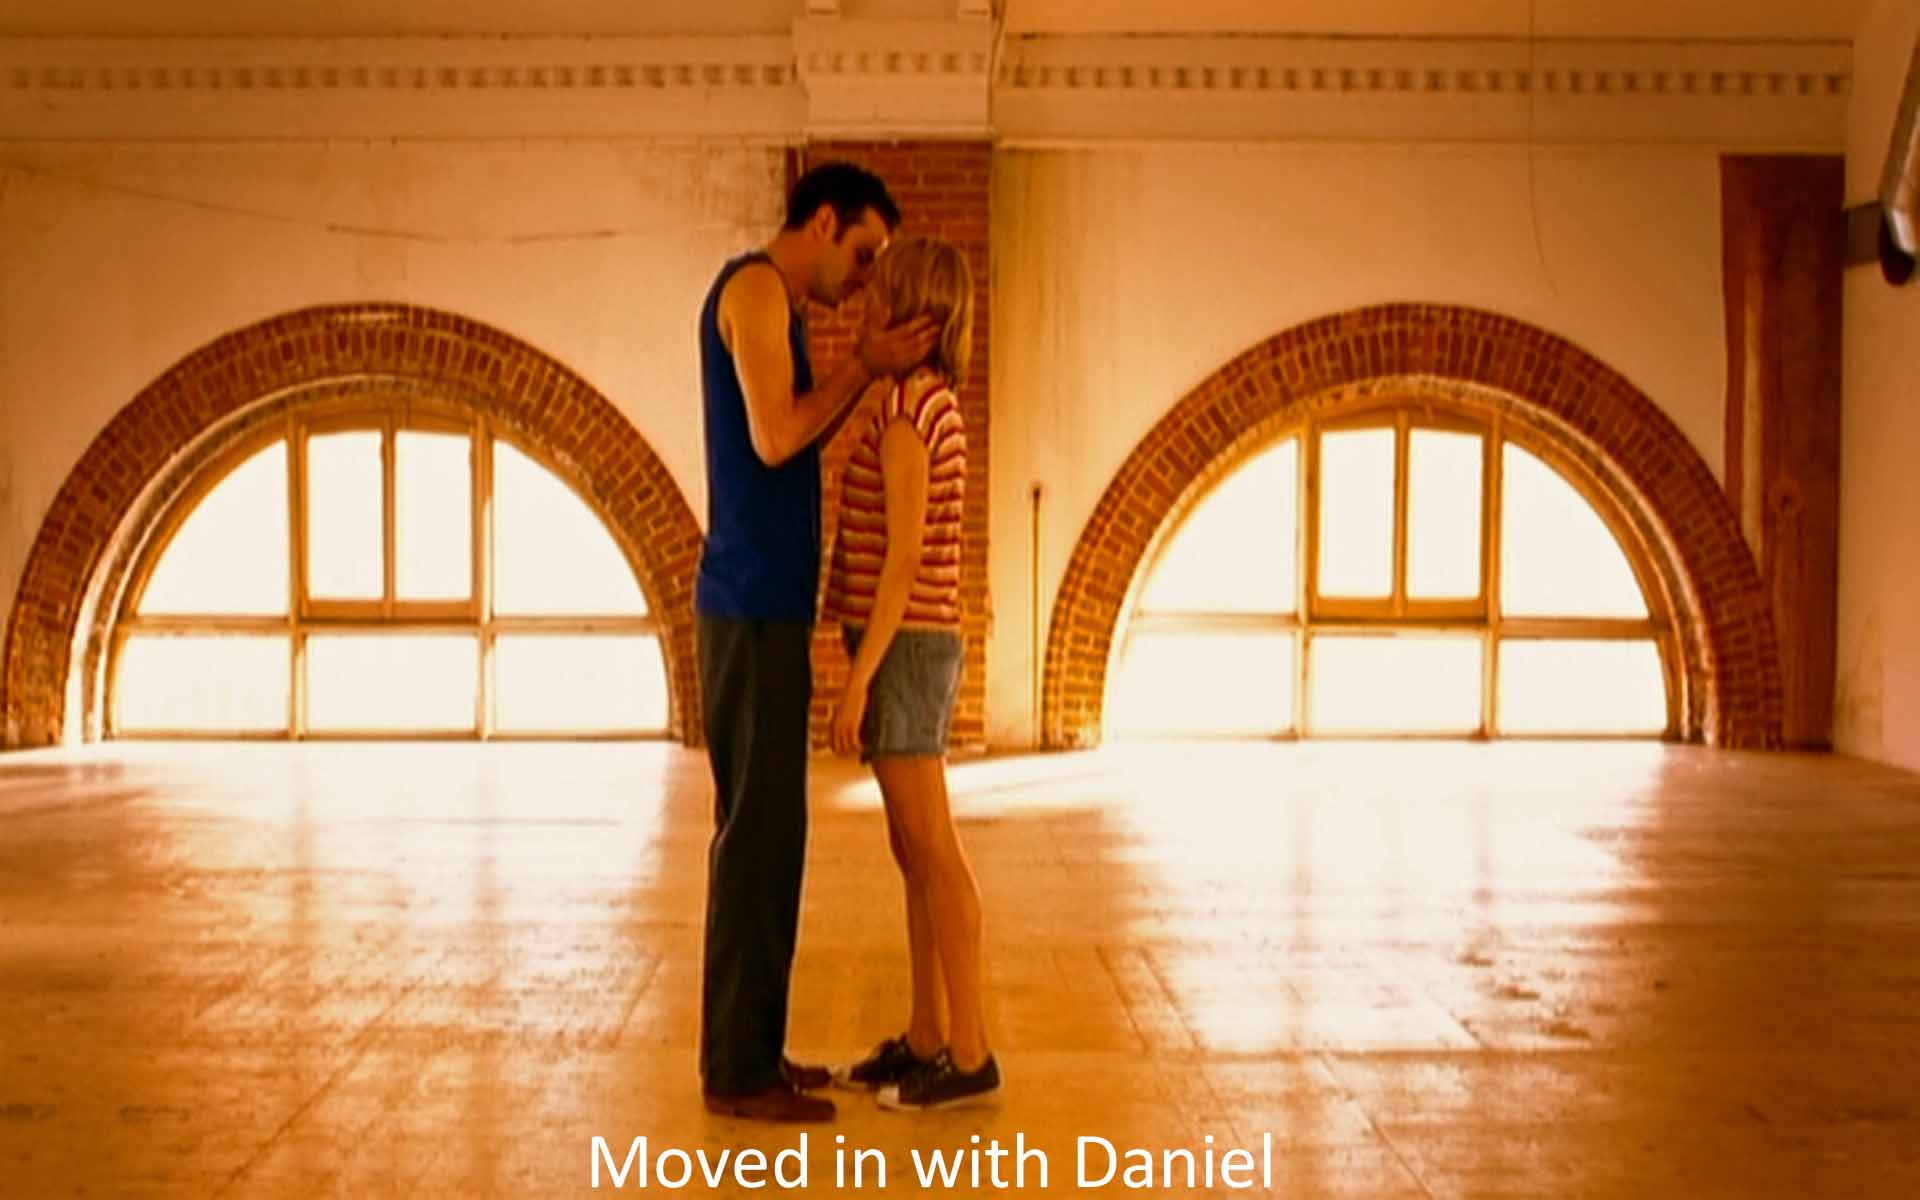 Moved in with Daniel